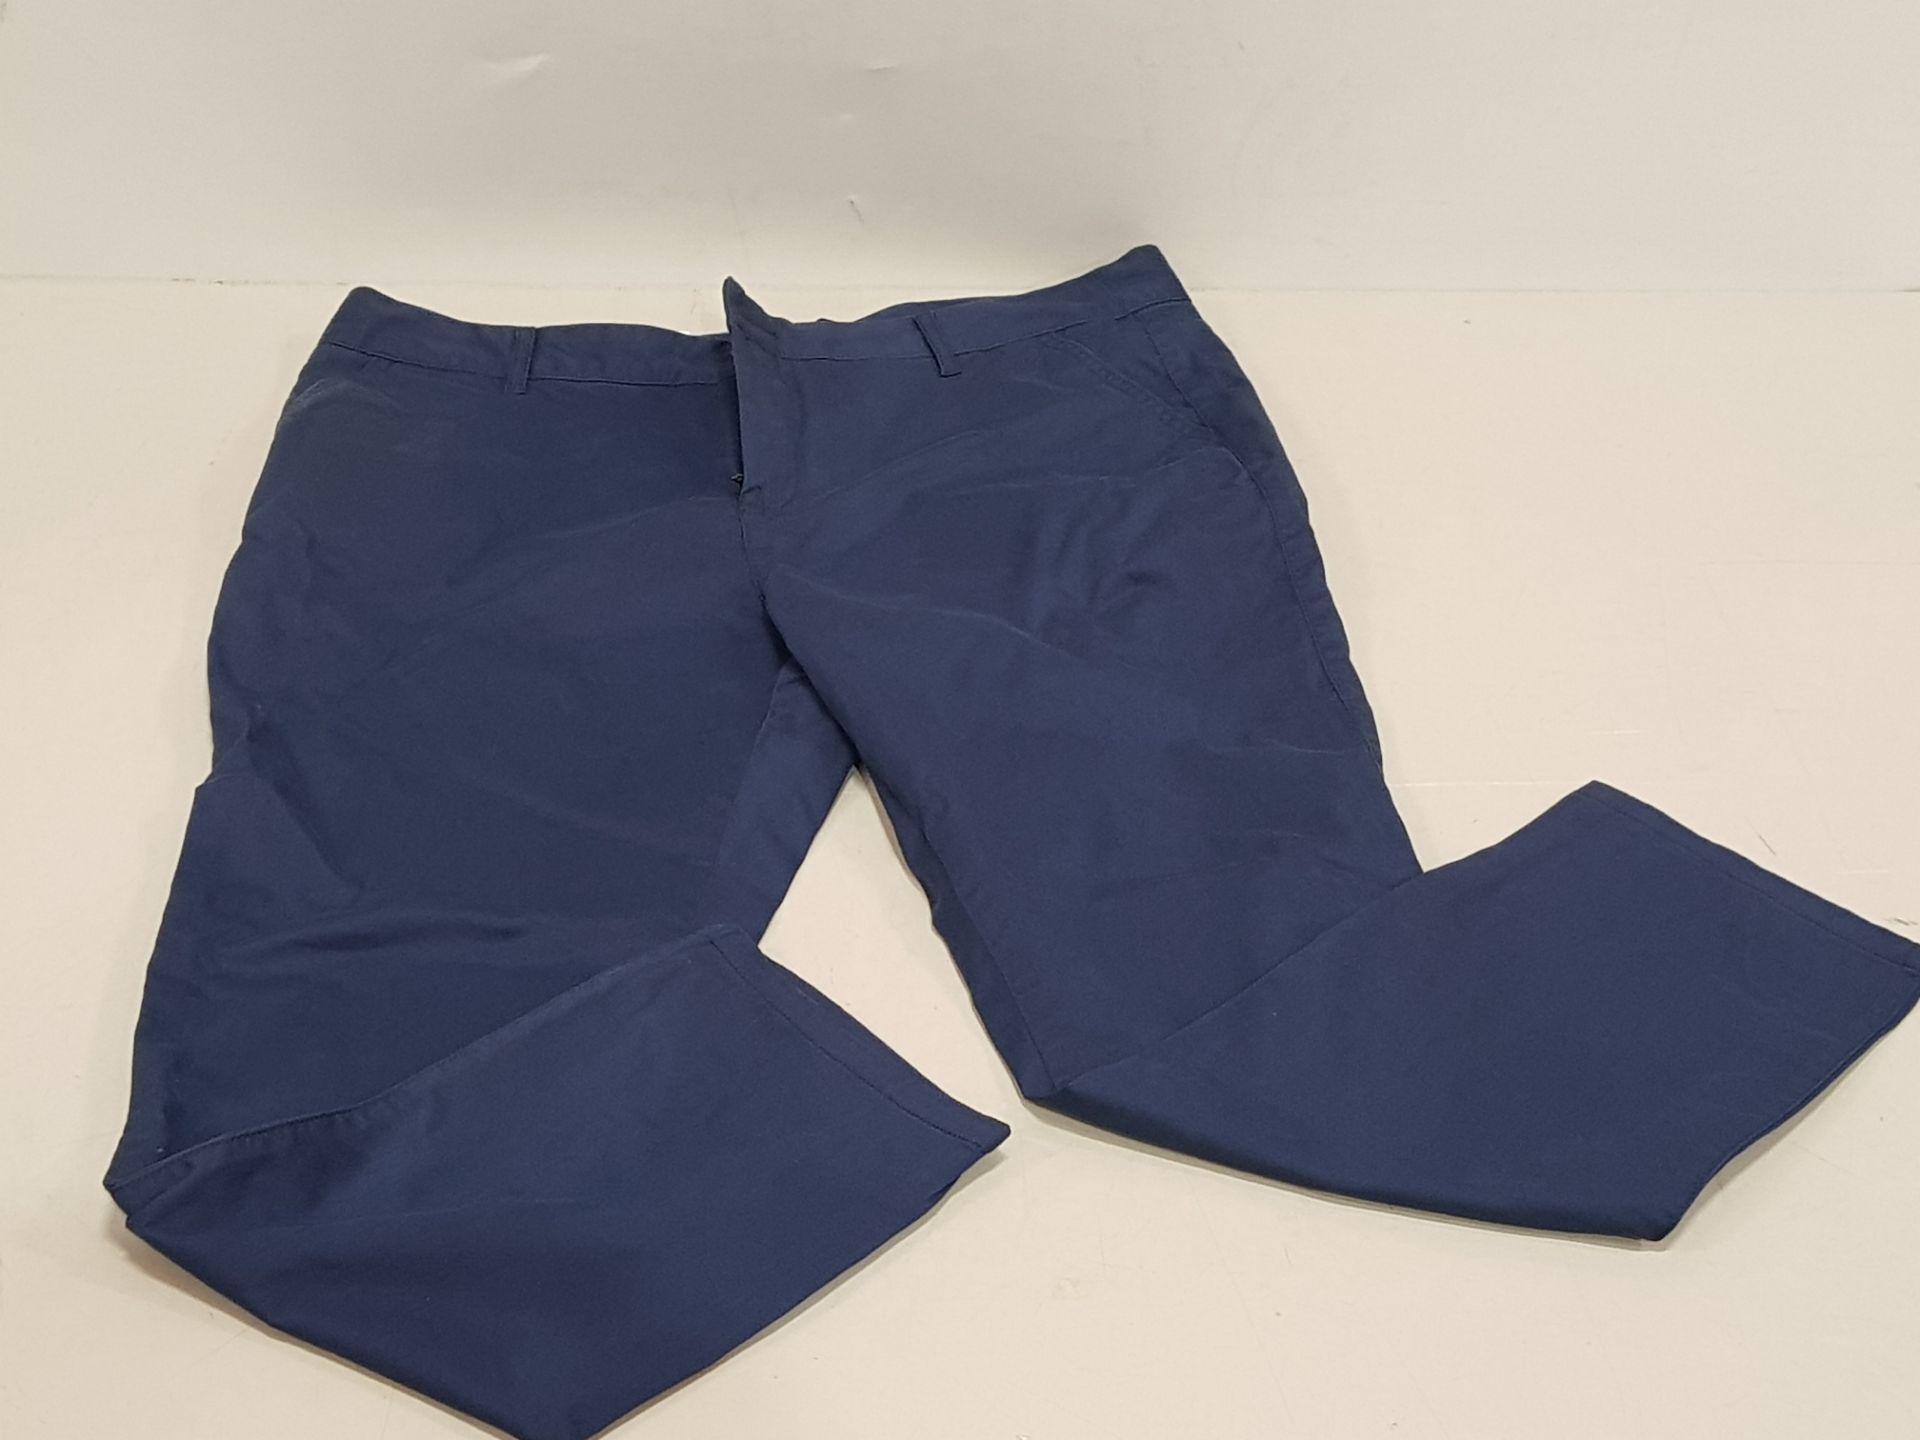 32 X BRAND NEW AEROPOSTALE WOMEN'S CHINO'S IN NAVY BLUE SIZE 30R IN ONE BOX